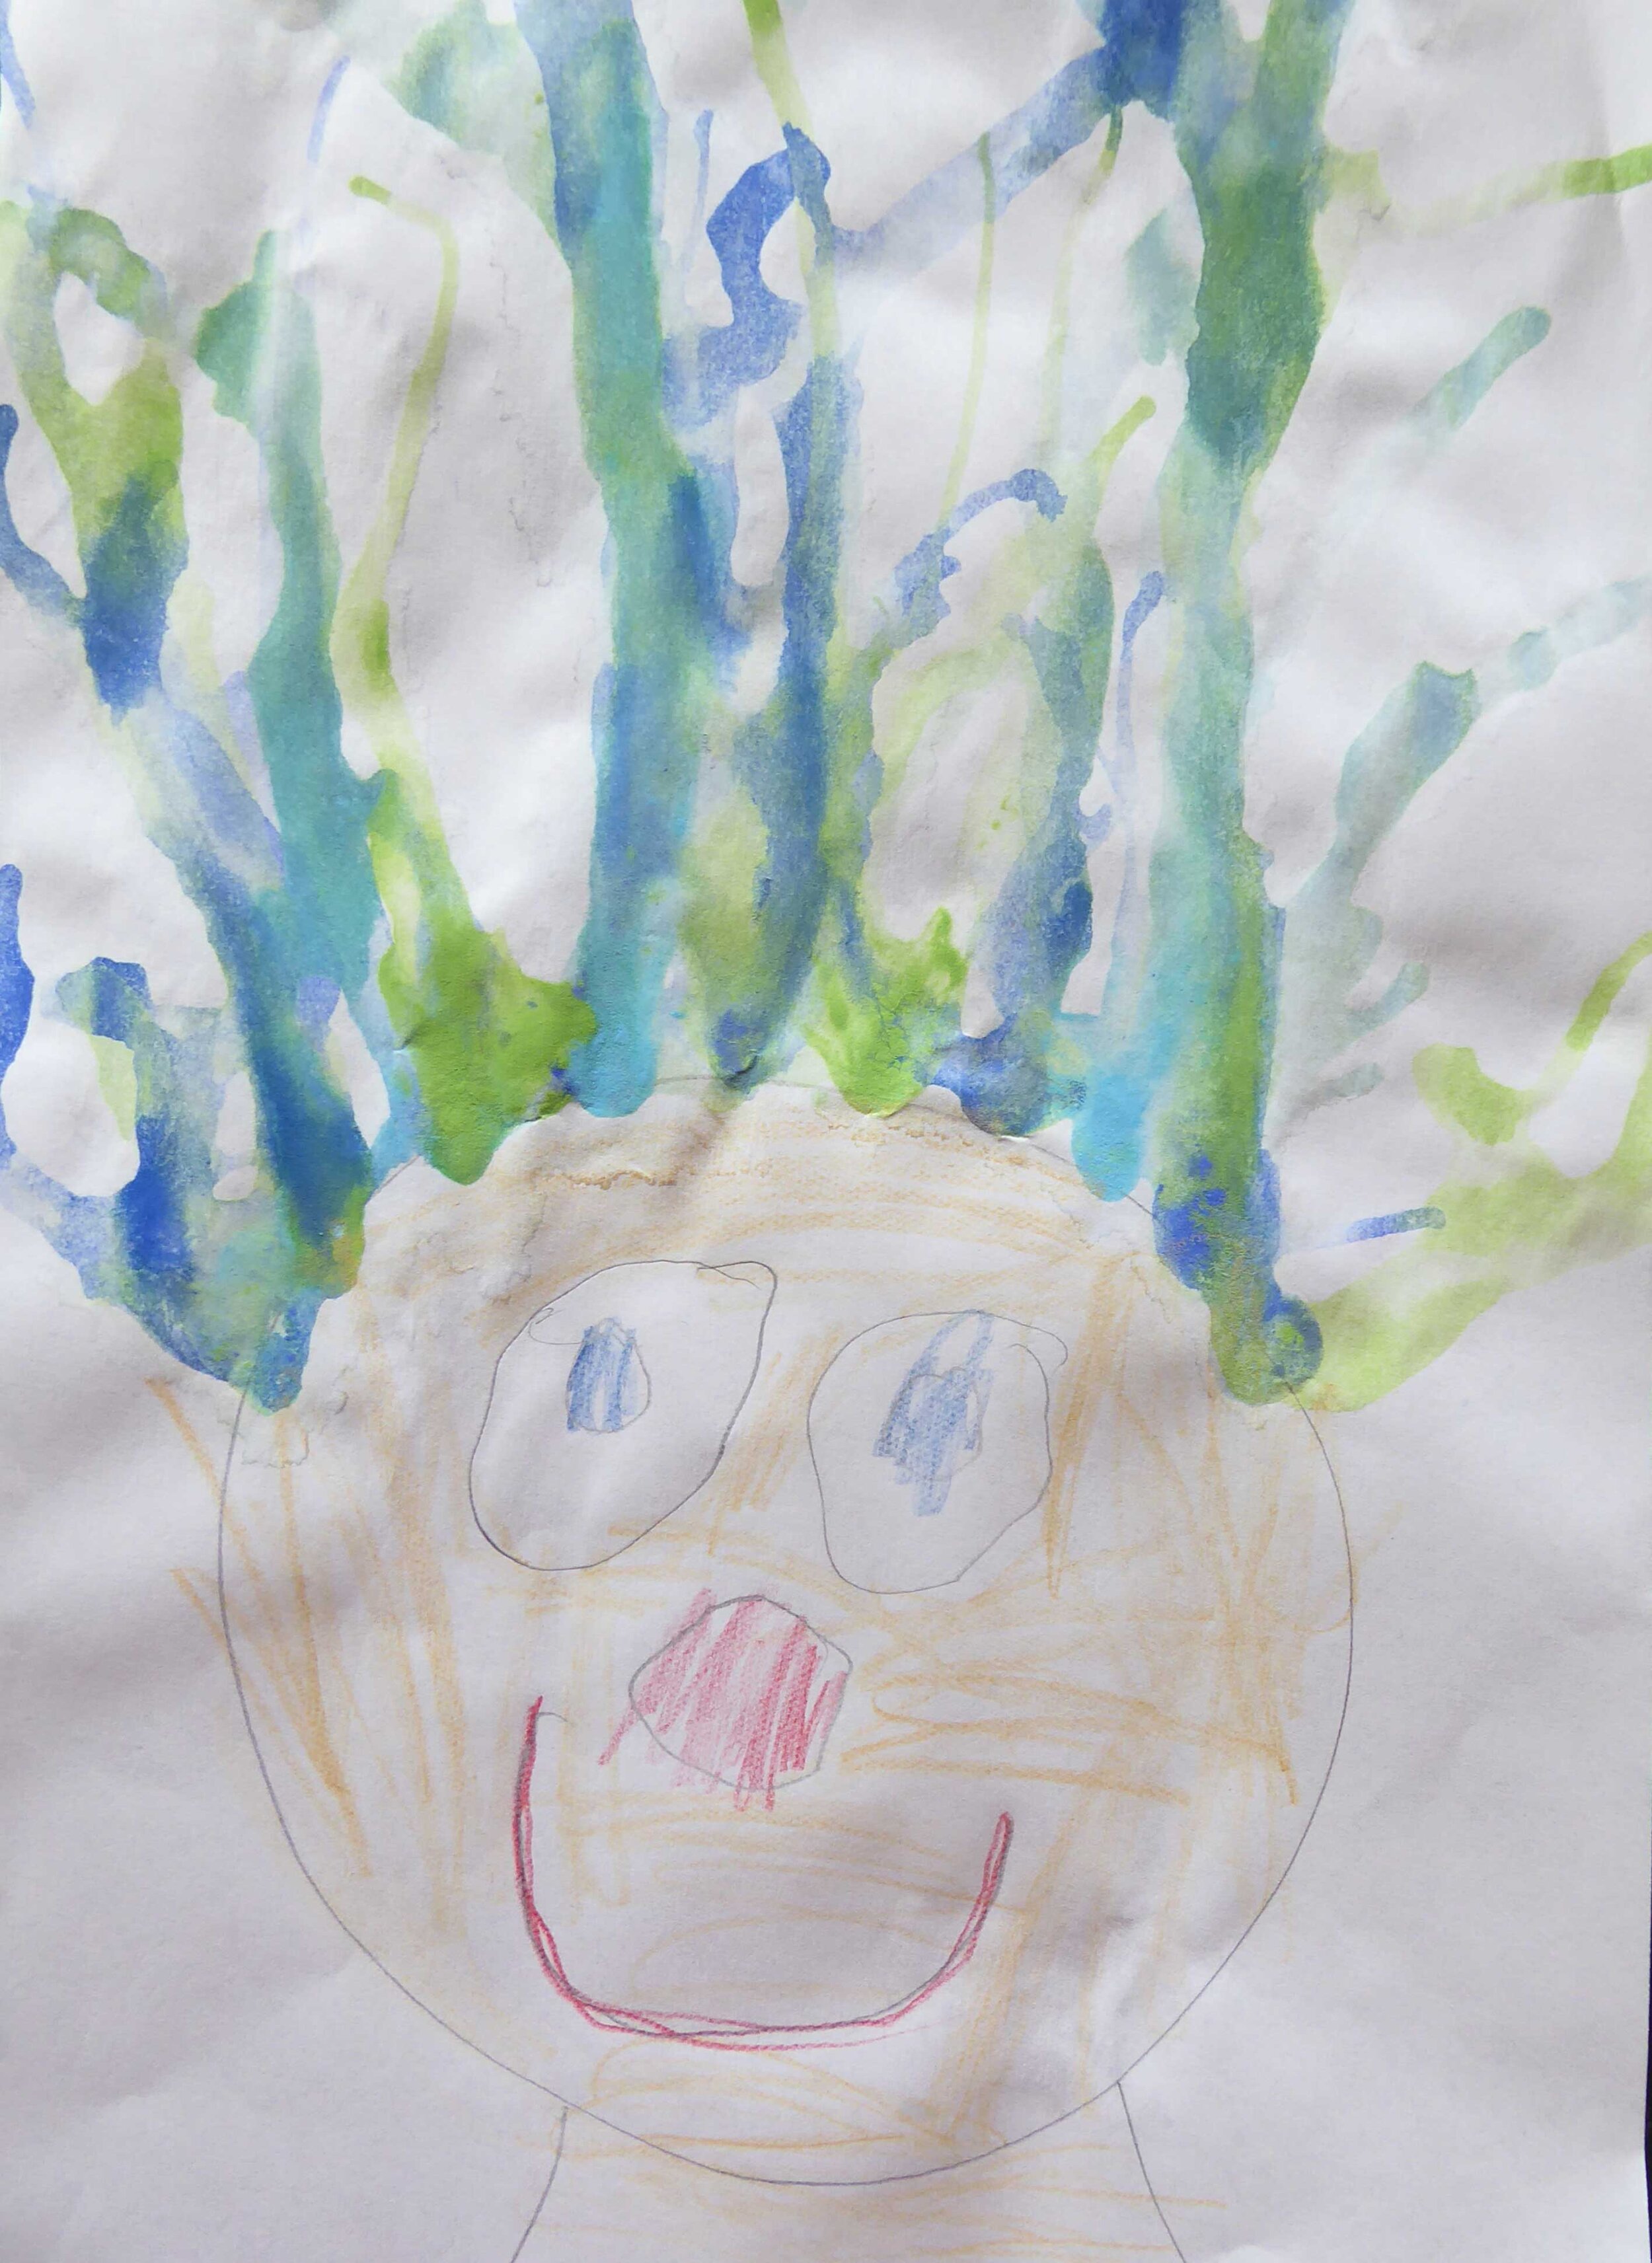 Hair Raising! by Erland Sclater age 6